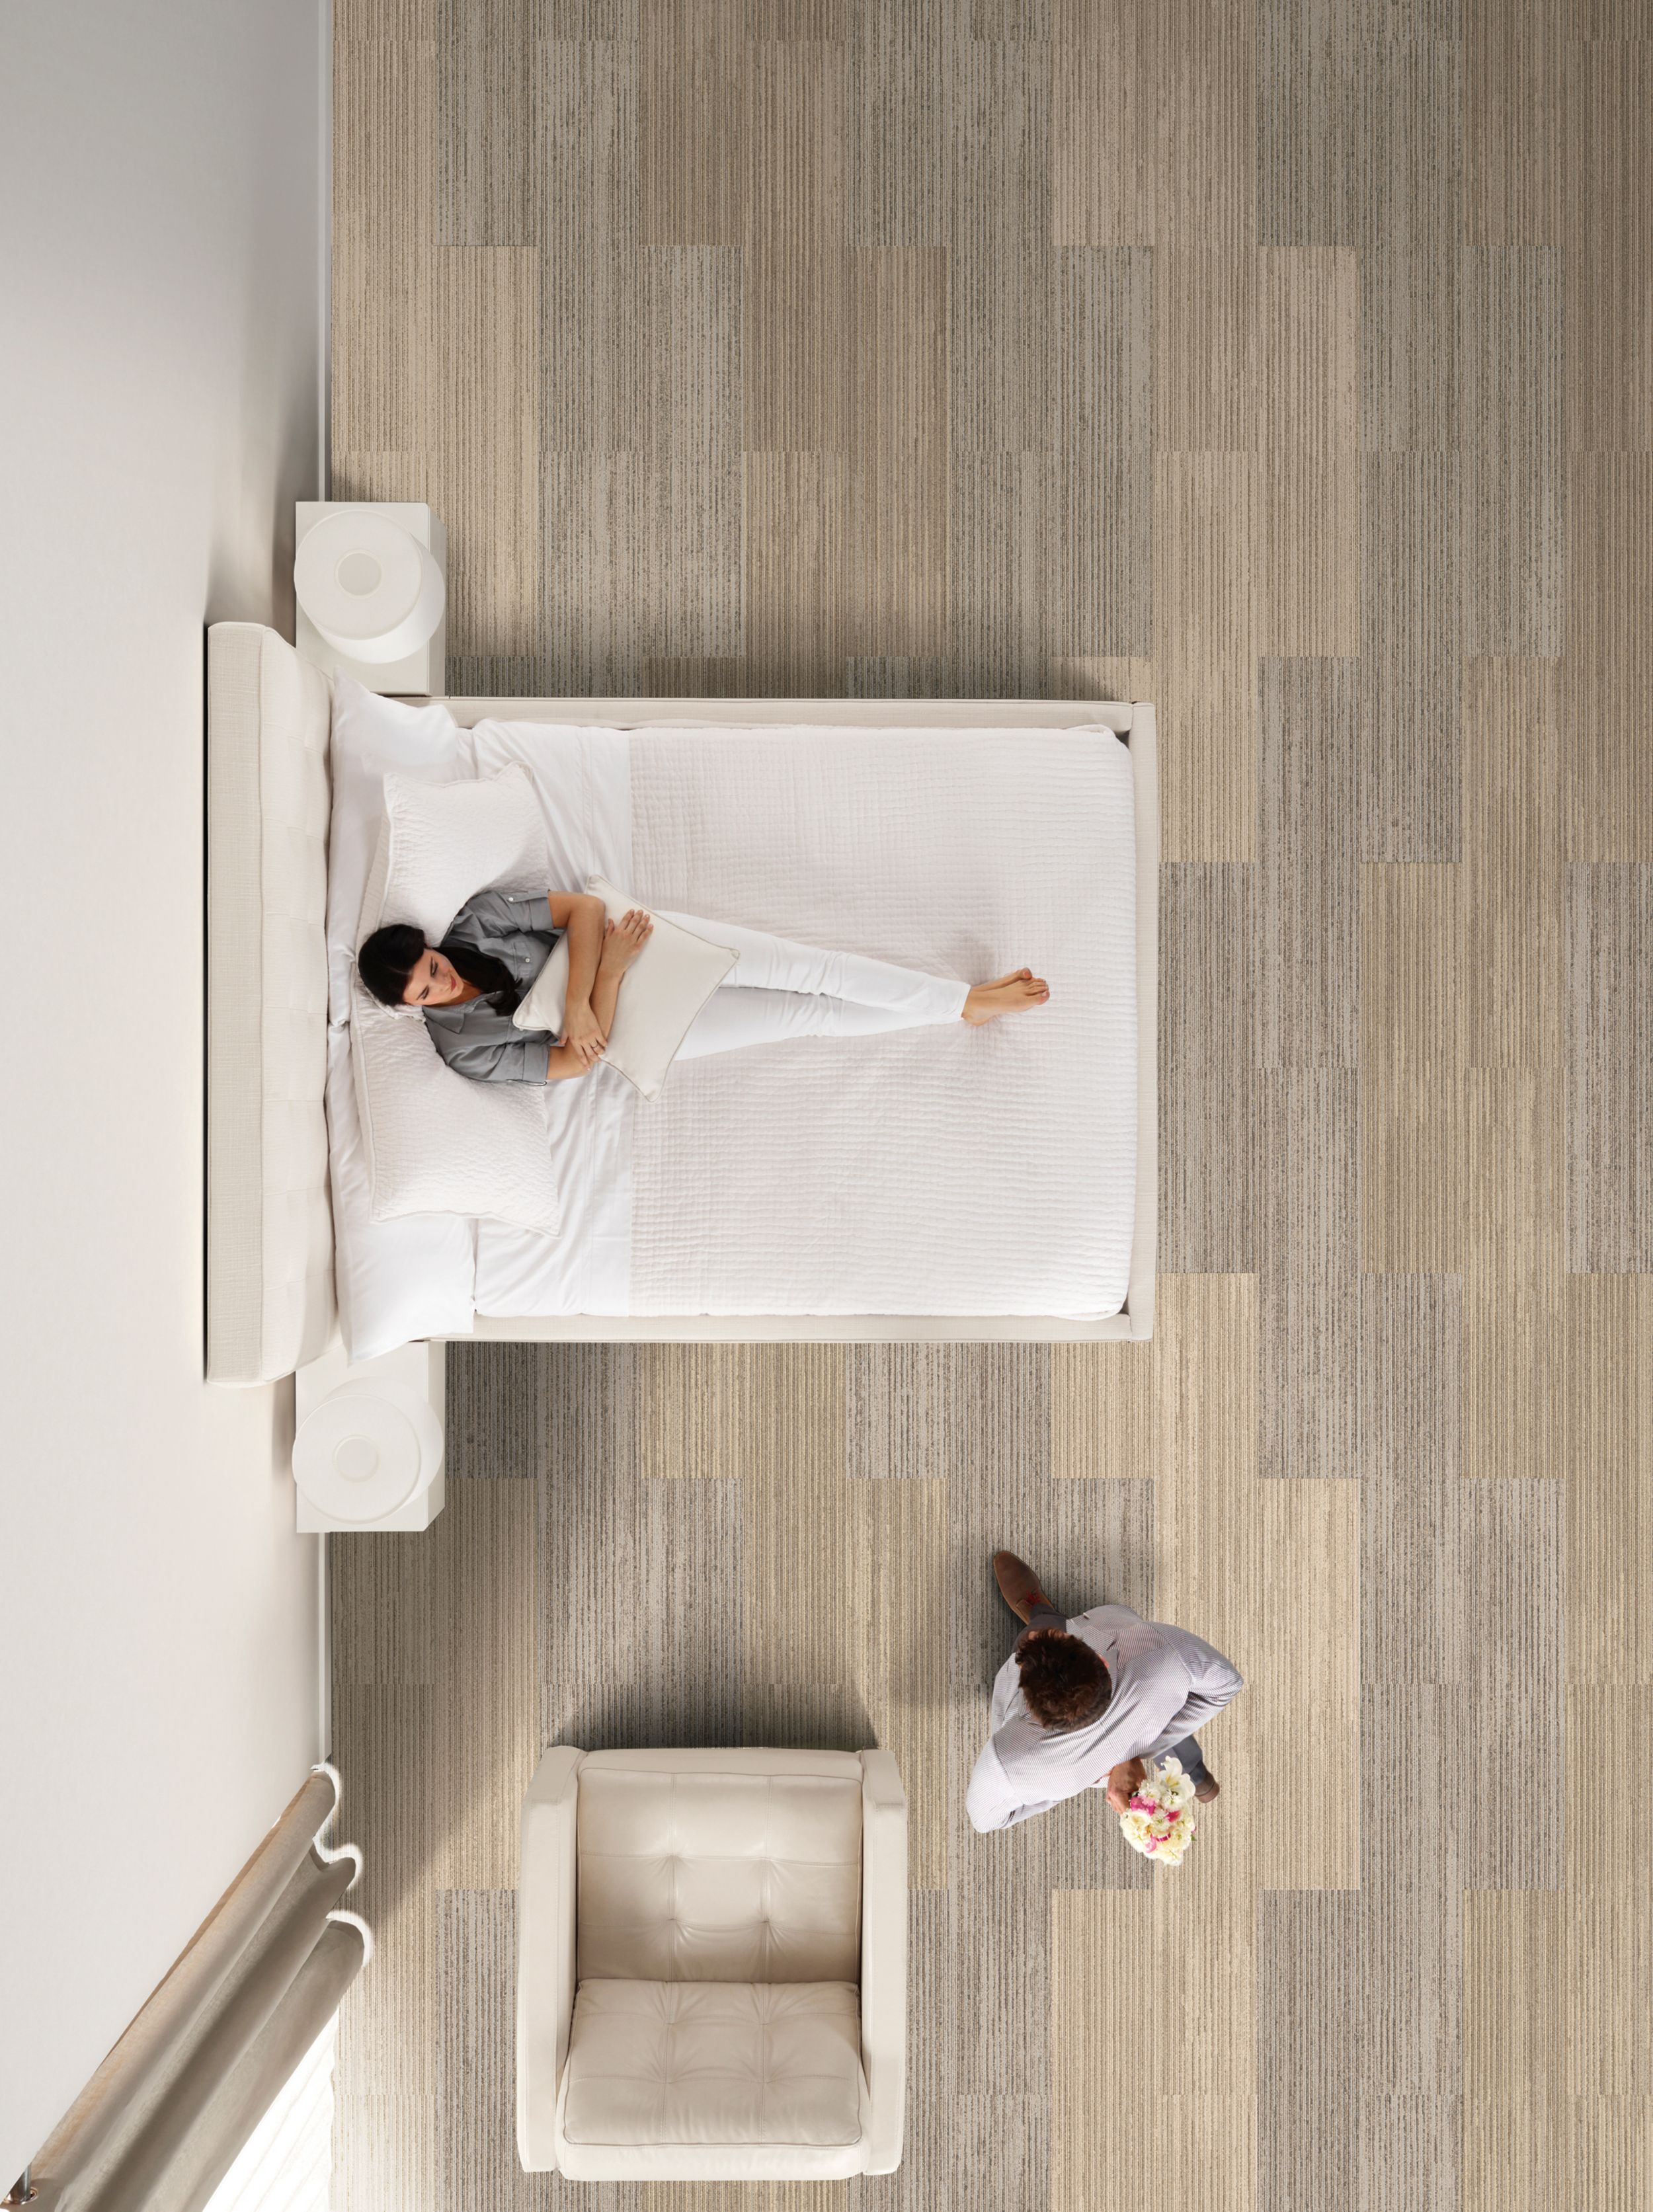 Interface SWTS 110 plank carpet tile in hotel guest room with woman and child numéro d’image 7